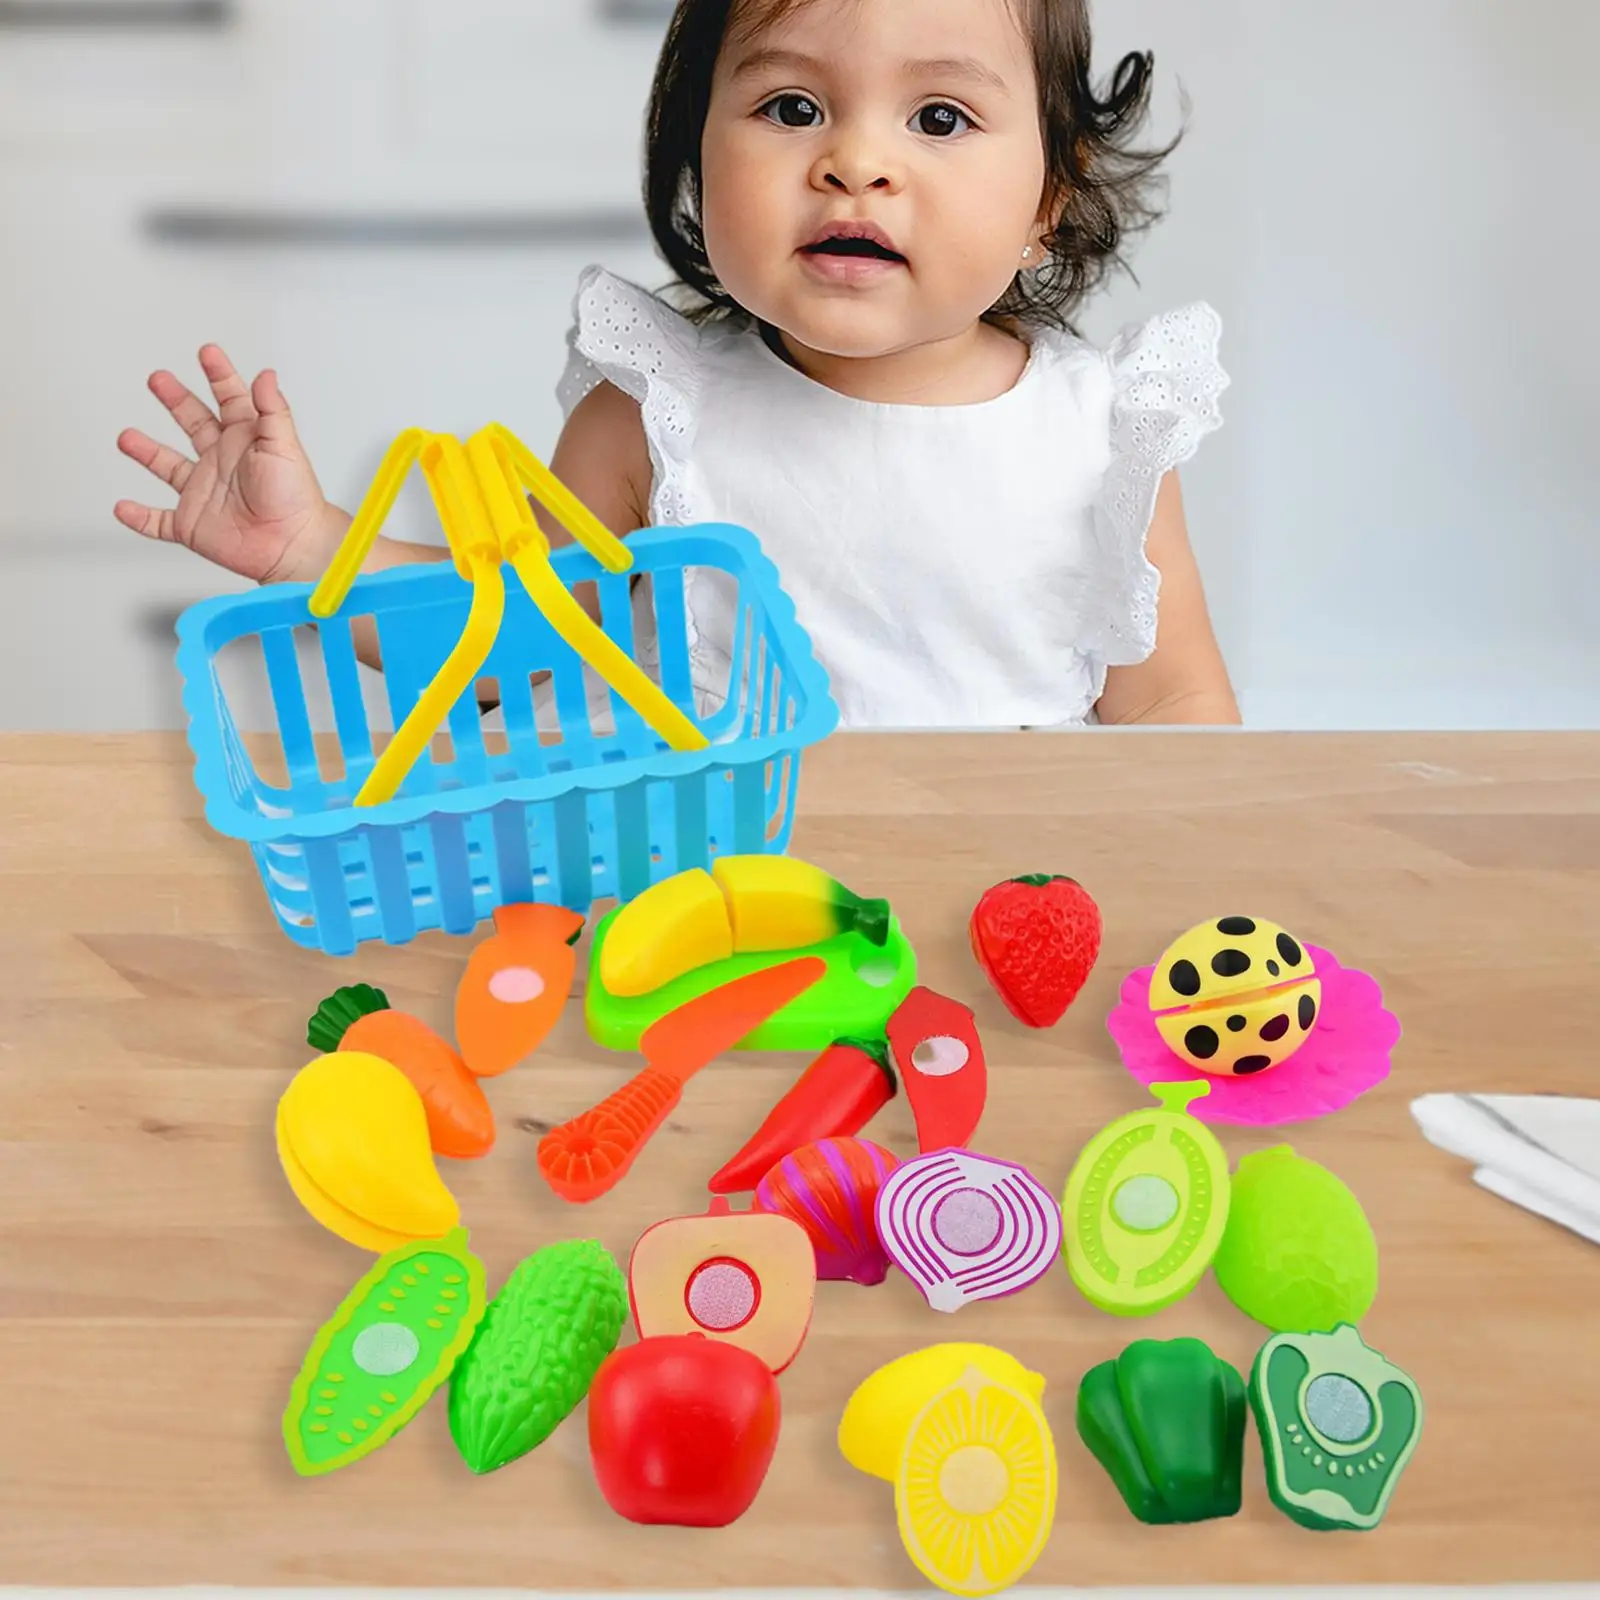 16Pcs Pretend Play Toys Set Plastic Fruits Vegetable Early Educational Game Cutting Fake Food for Over 3 Years Old Toddlers Kids